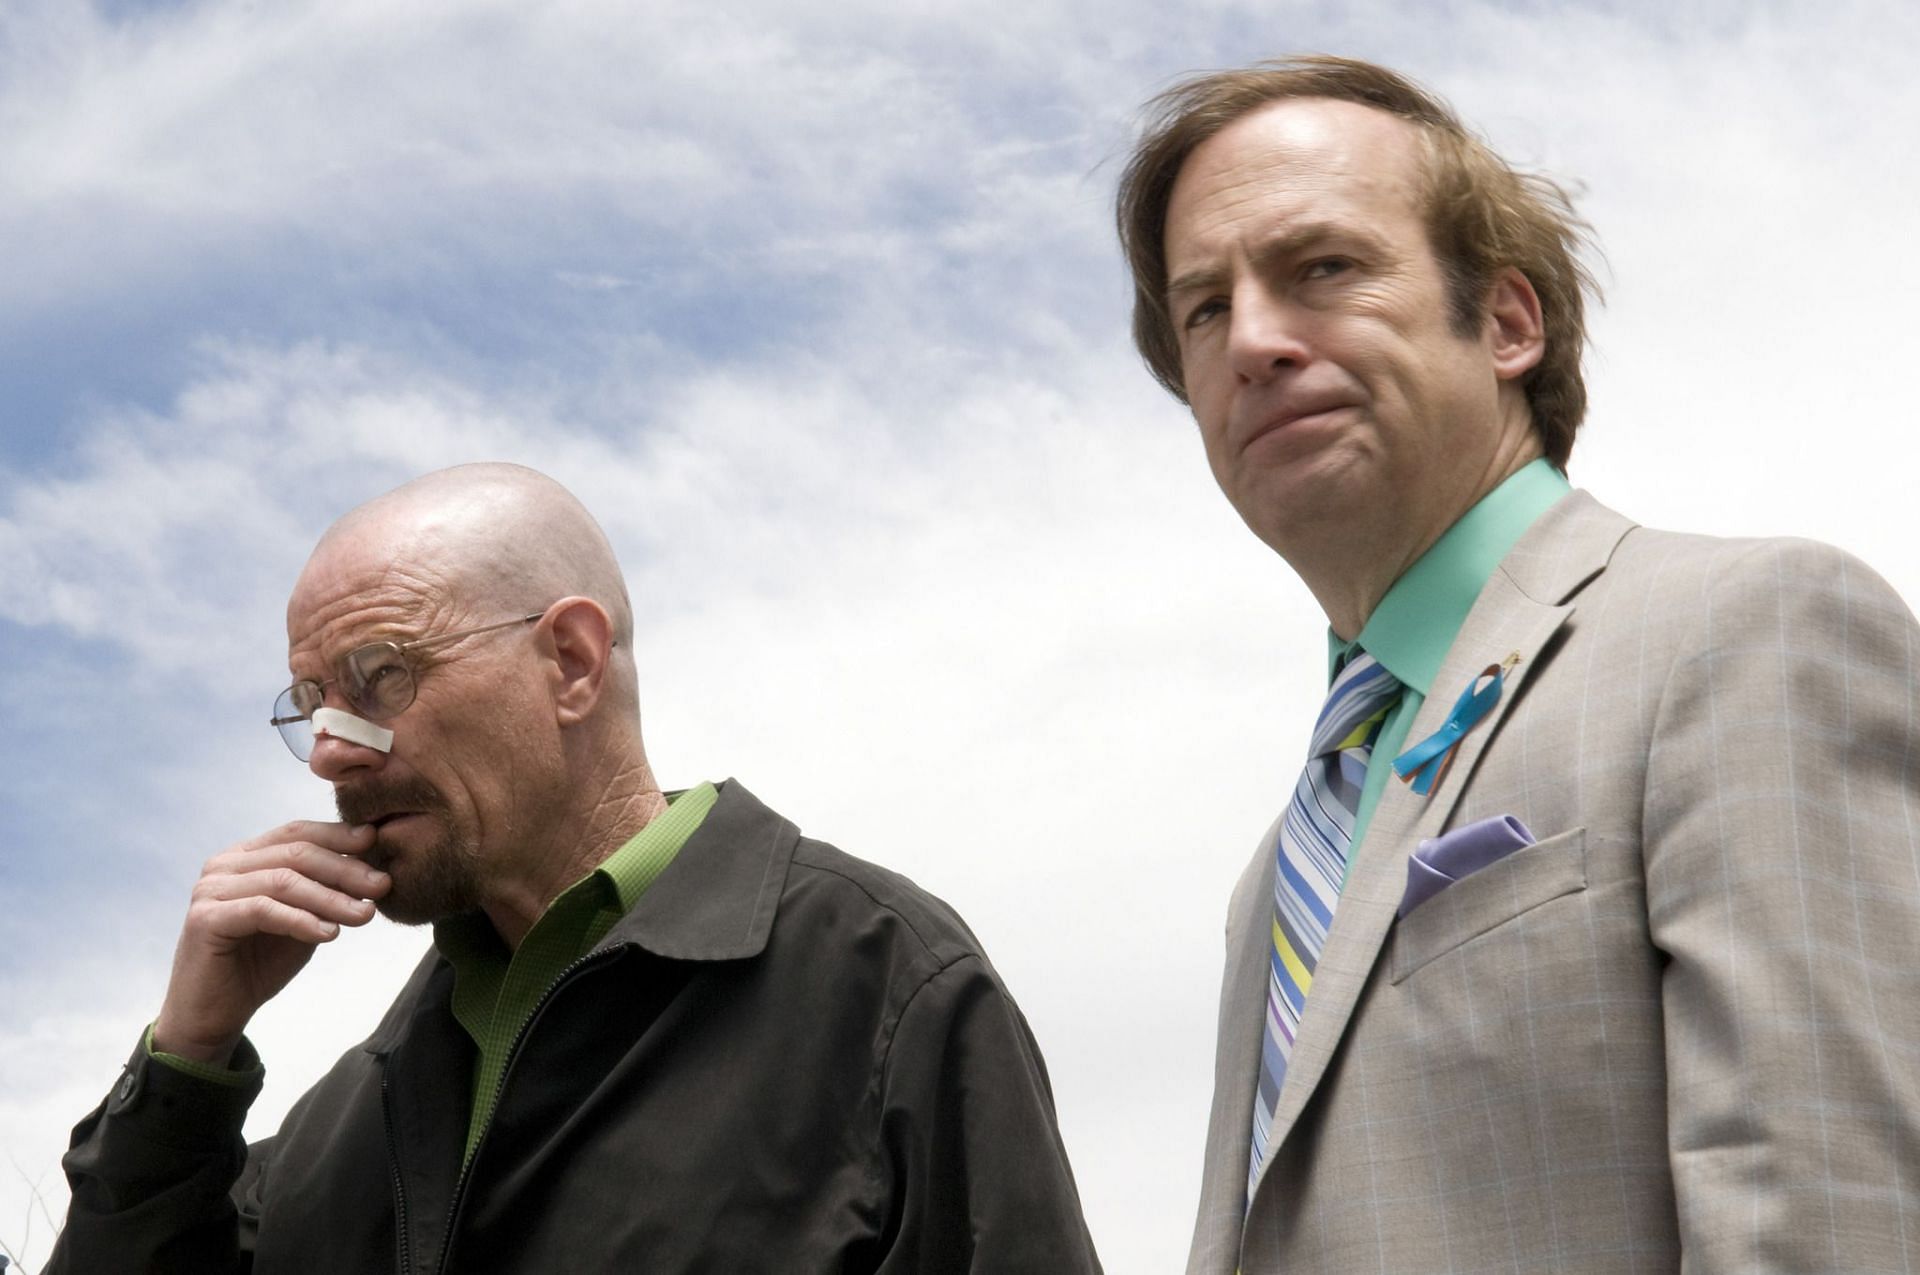 5 top shows like Breaking Bad